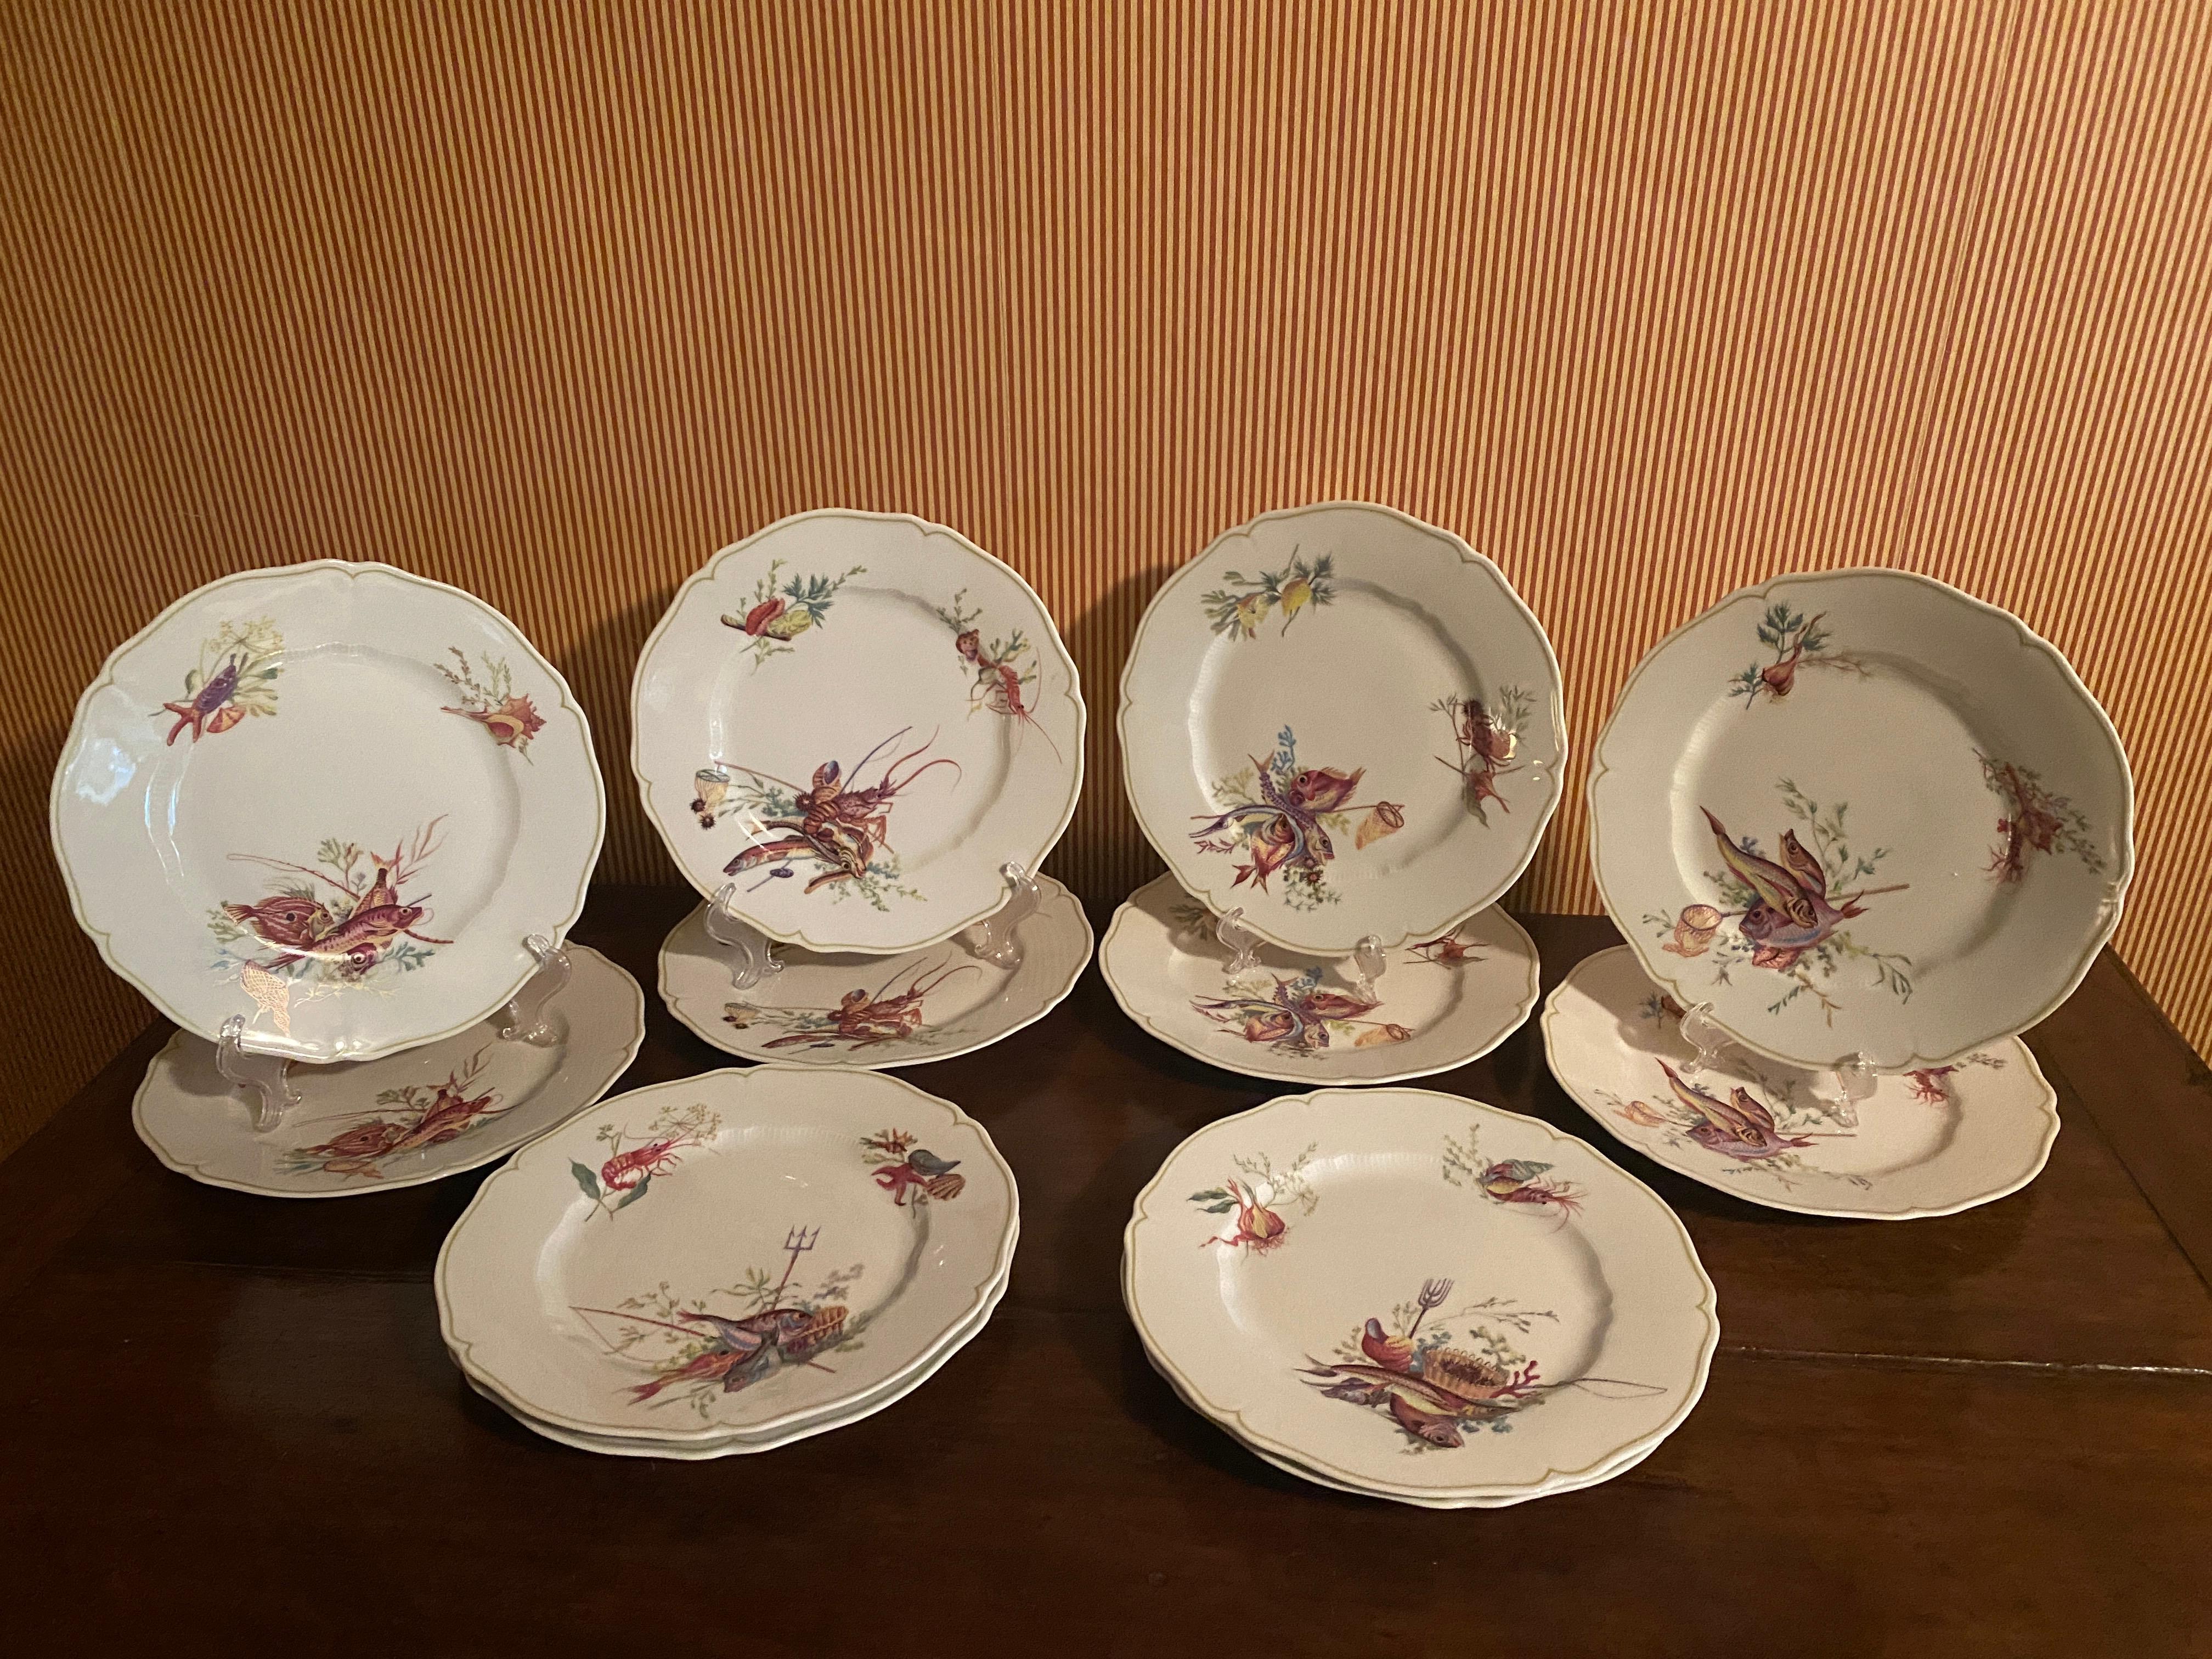 This set of Limoges Dinner Plates are quite rare. The set consists of six different designs, two each in
the set. The designs are very reminiscent of European Chinoisery decor used by many Porcelain
companies from the 18th century to mid century in